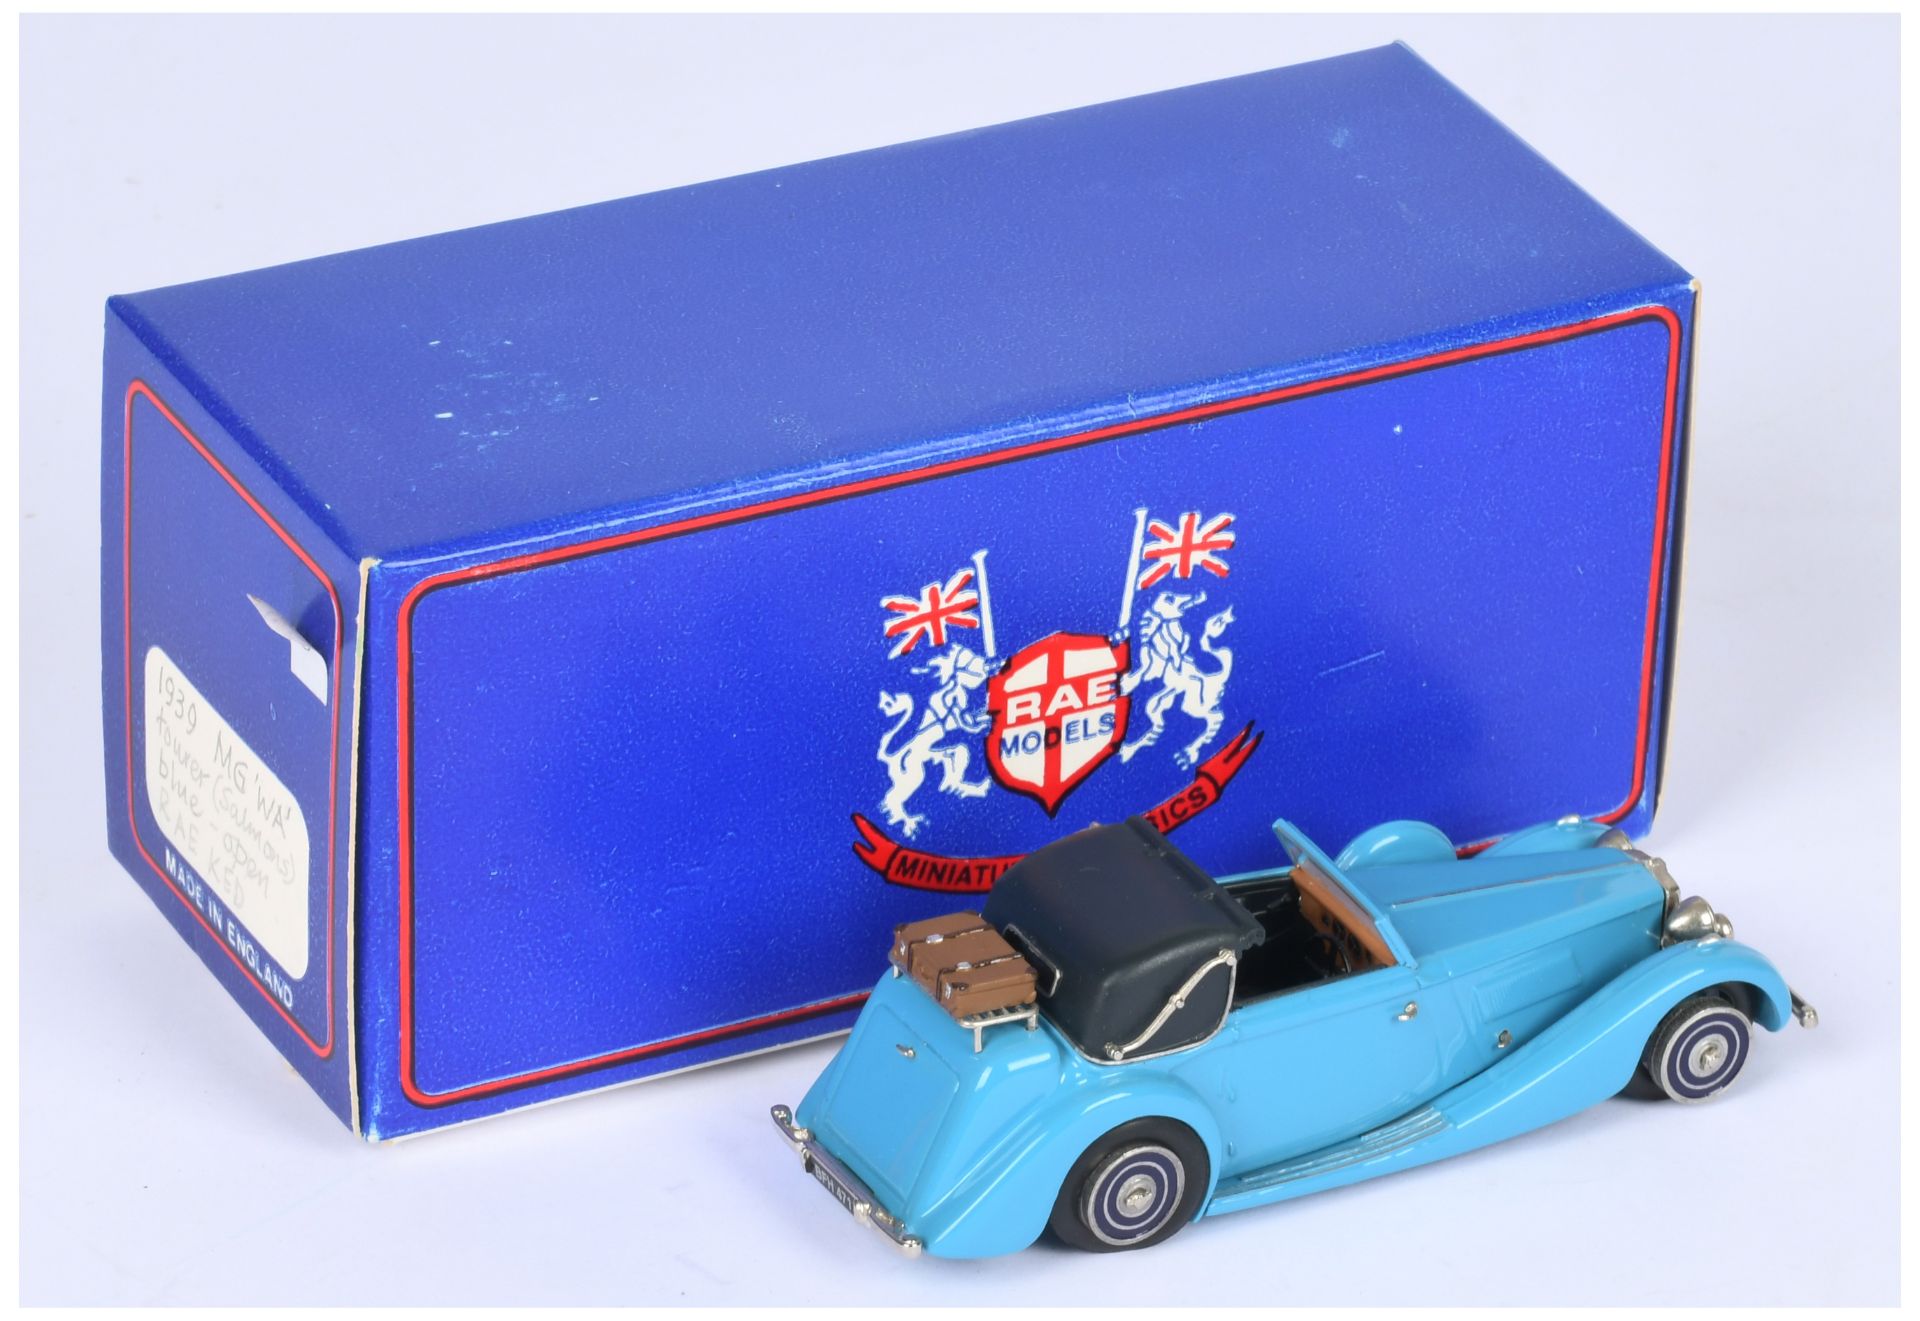 RAE Models KED058 F MG Collection MG WA Tourer - blue with dark blue interior & hood - Near Mint,... - Image 2 of 2